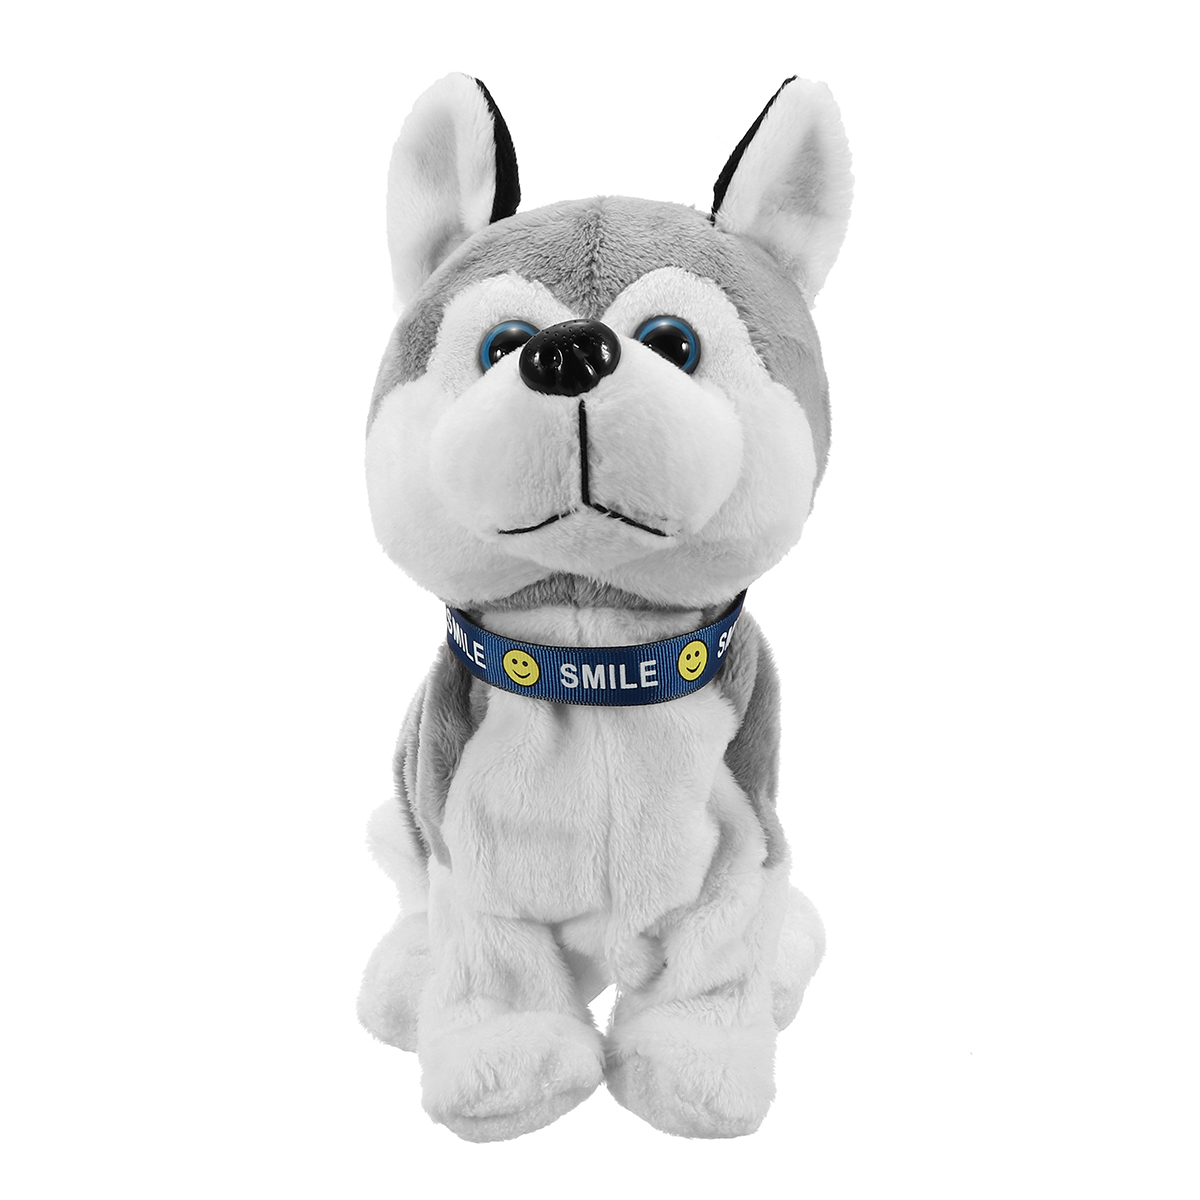 Interactive-Dog-Electronic-Pet-Stuffed-Plush-Toy-Control-Walk-Sound-Husky-Reacts-Touch-1414452-6